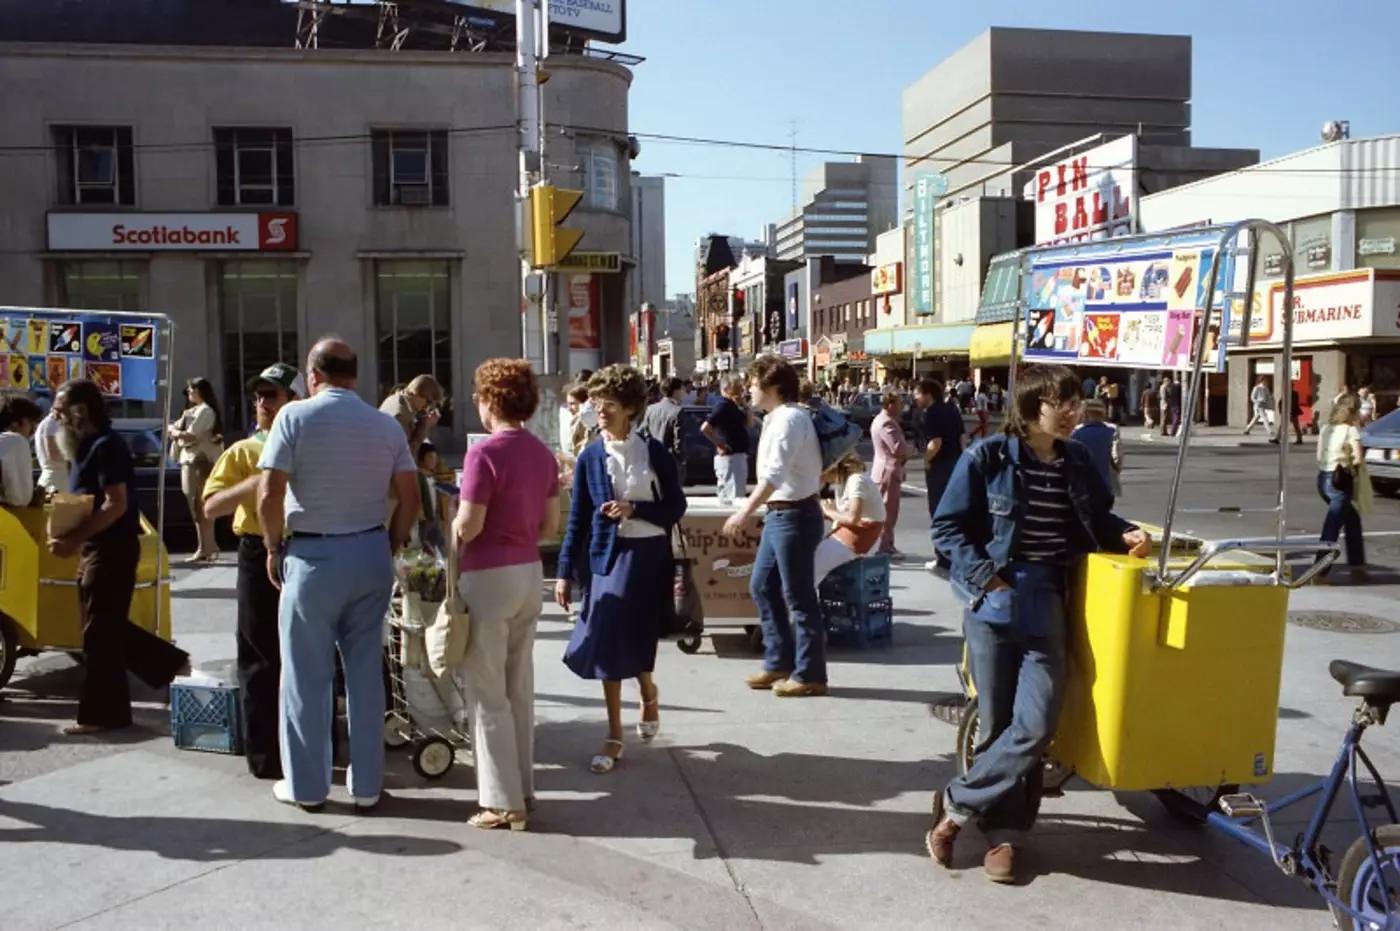 Dundas and Victoria streets, 1980s